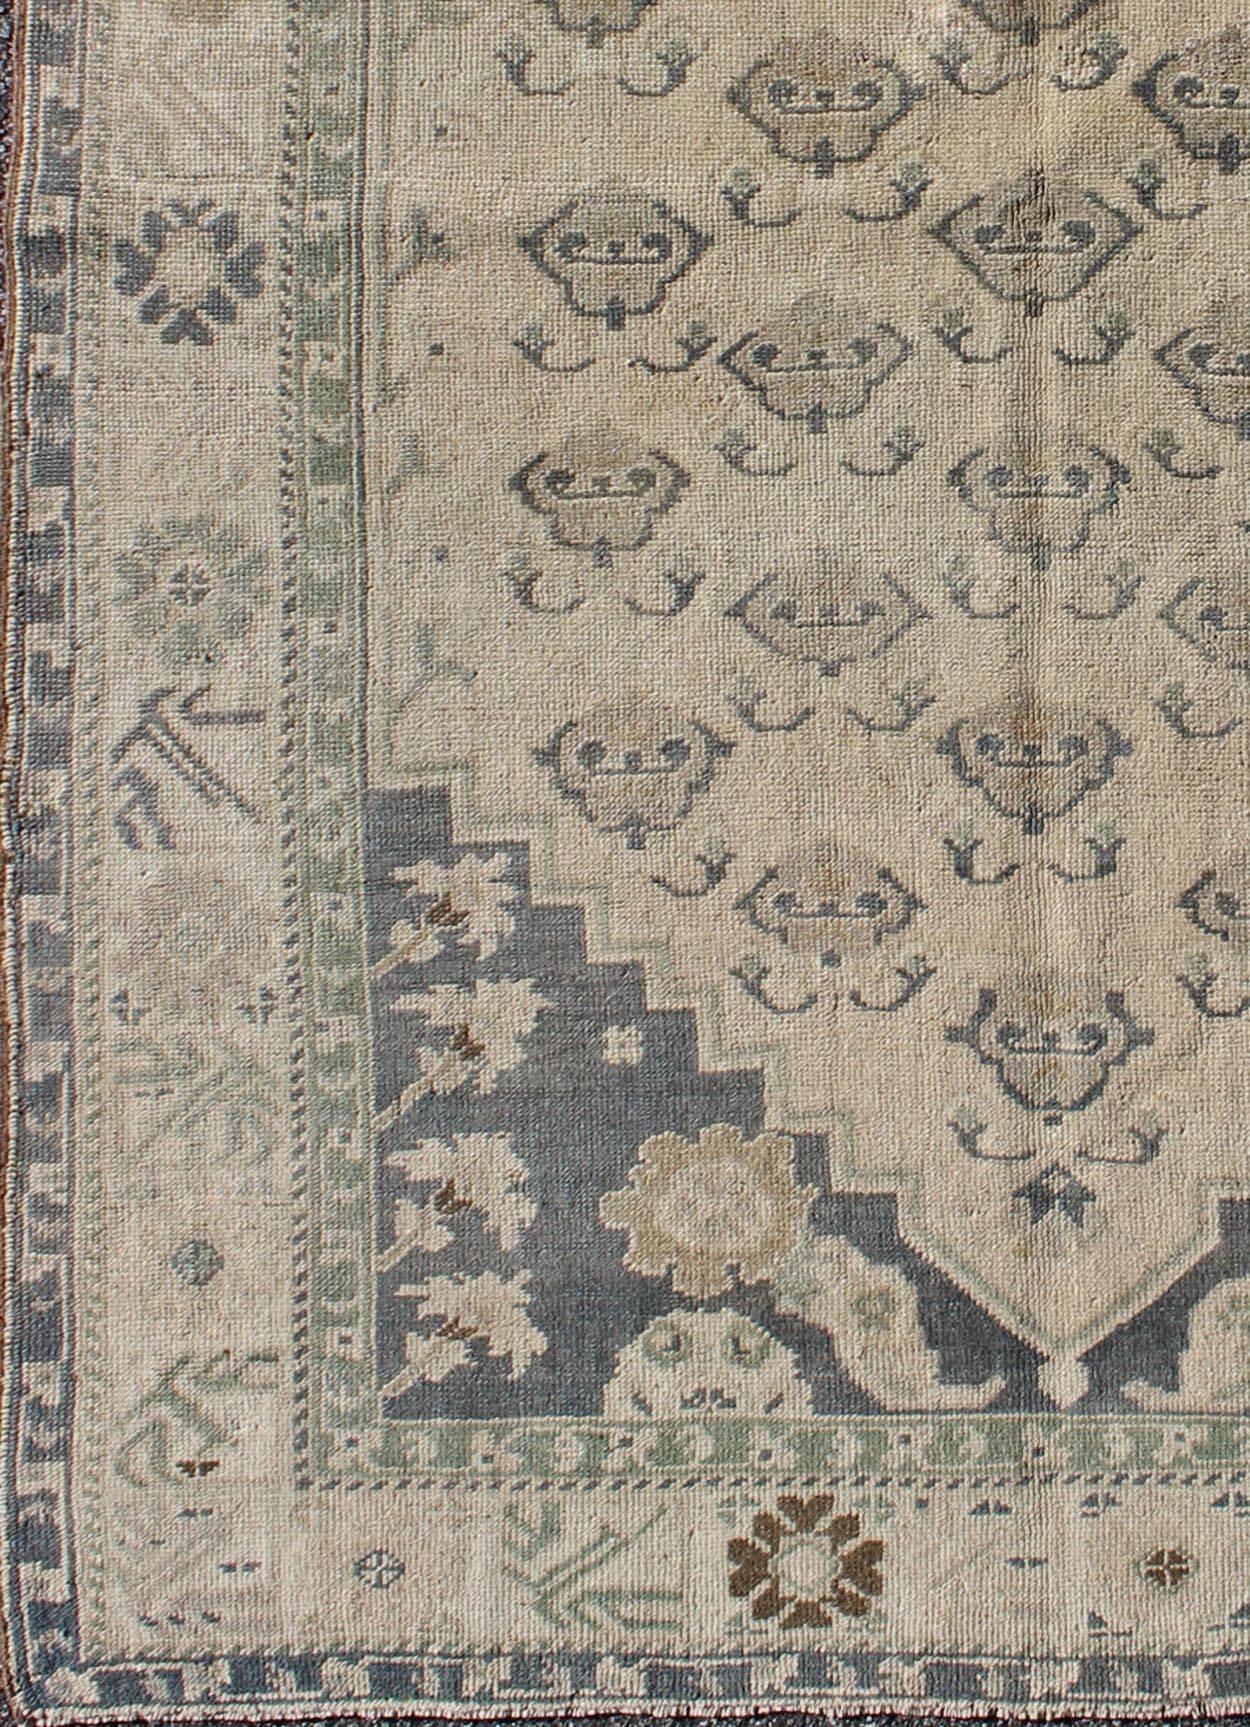 All-over blossom design vintage Turkish Oushak rug in taupe and greyish blue, rug tu-TRS-3613, country of origin type: Turkey Oushak, circa 1940.

This Oushak carpet (circa mid-20th century) features an all-over pattern of vining blossoms spread